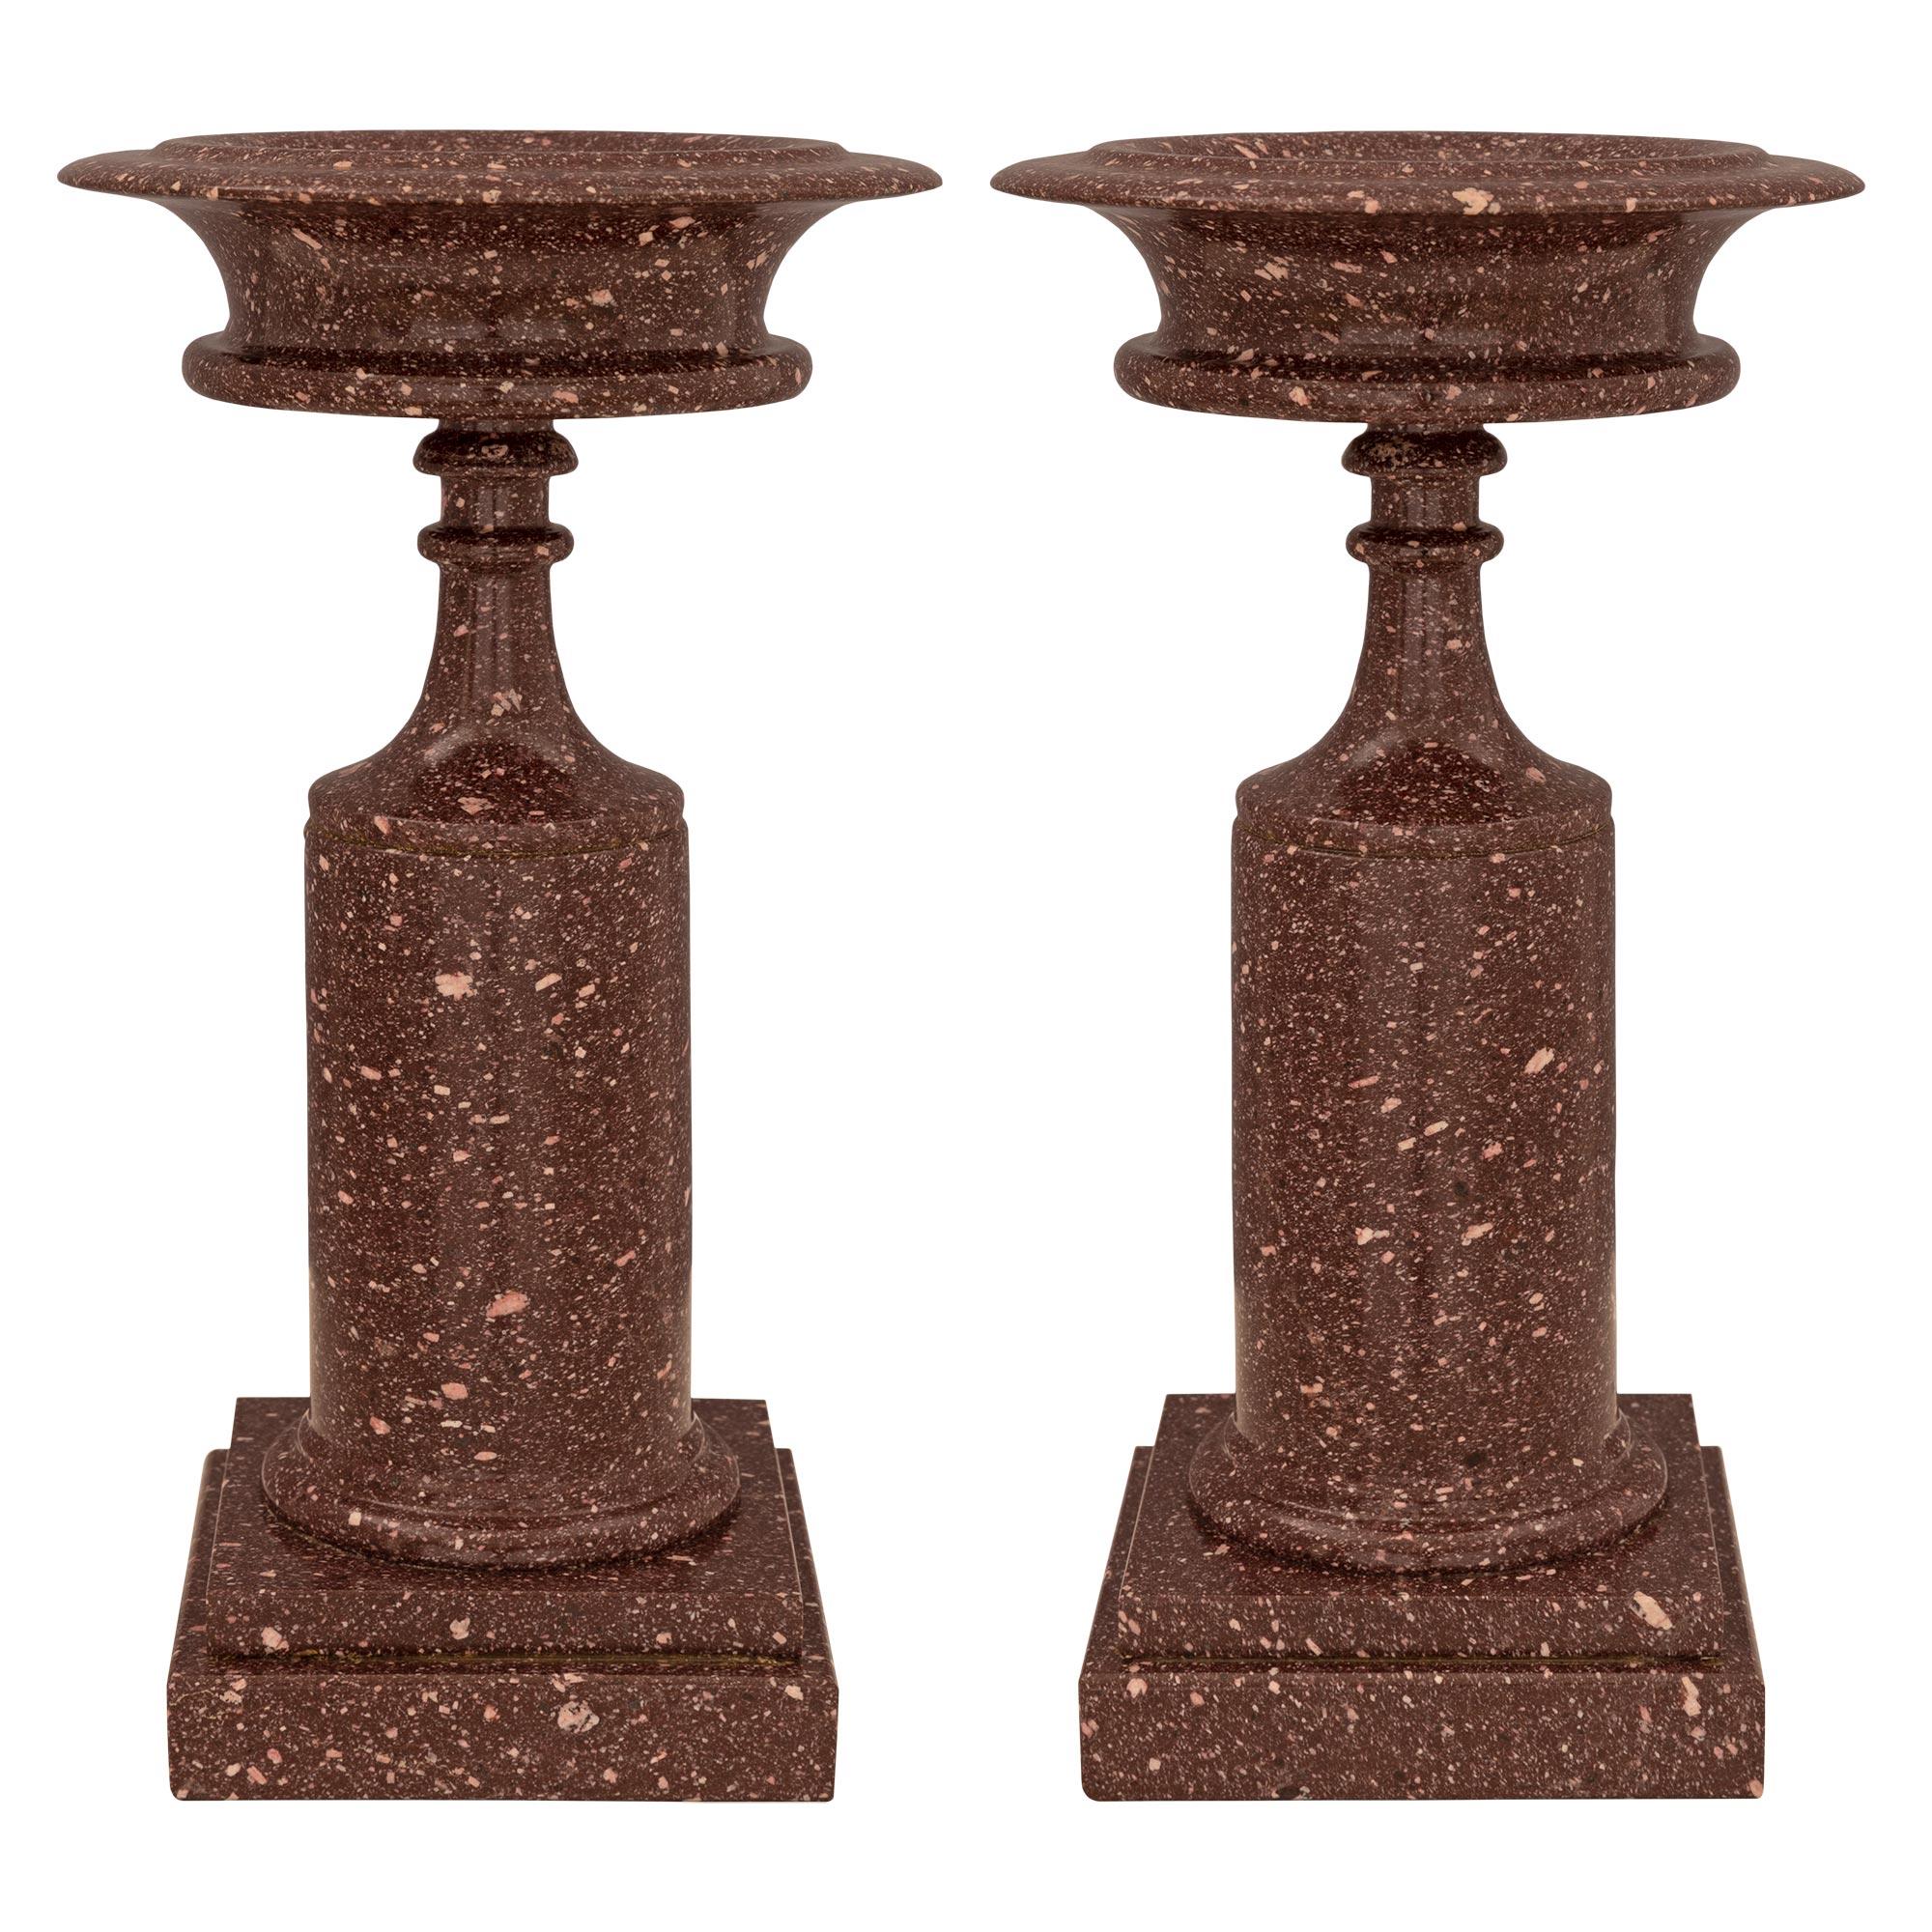 An extremely elegant pair of Italian 19th century Neo-Classical st. Grand Tour period Imperial Porphyry tazzas. Each tazza with wonderful proportions is raised by a square stepped base below the superb baluster shaped central support with an elegant